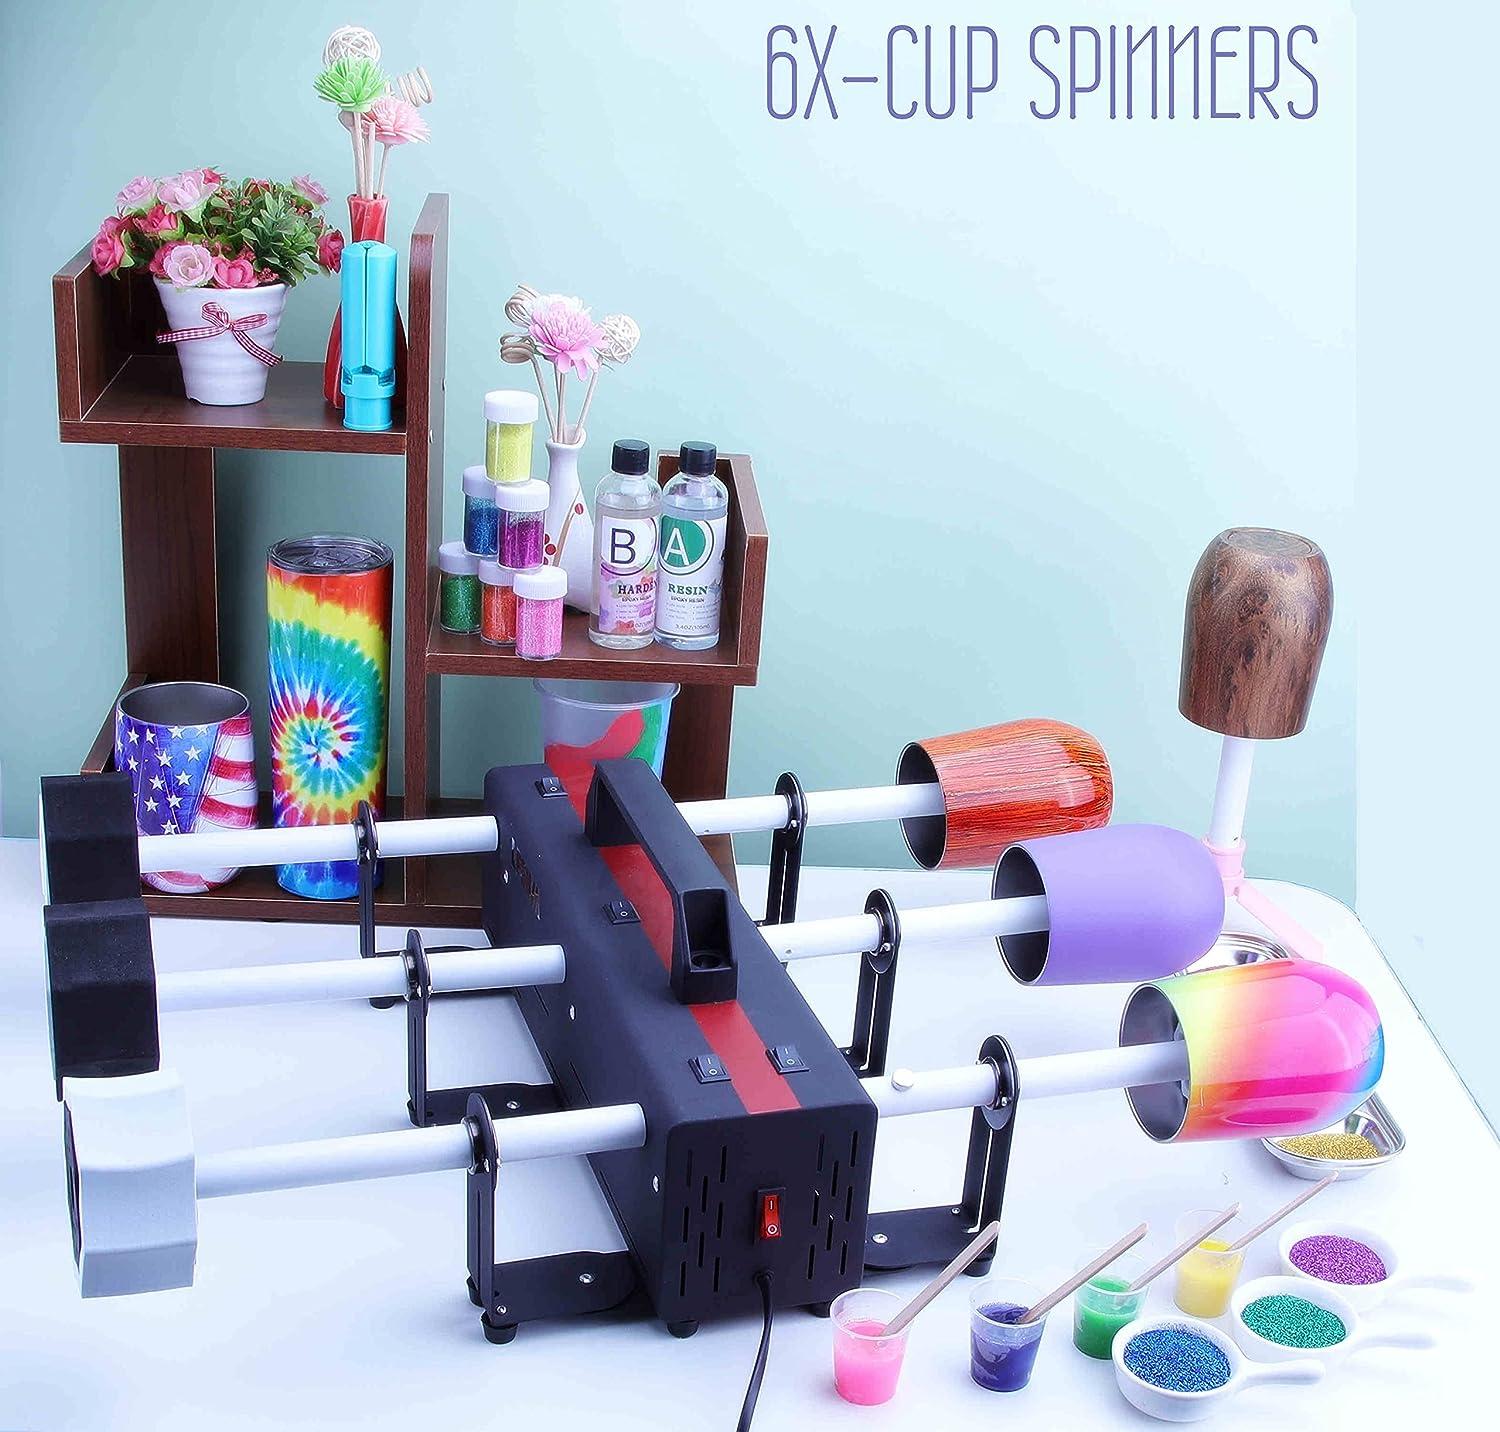  LFSUM Cup Turner for Crafts Tumbler Cup Spinner